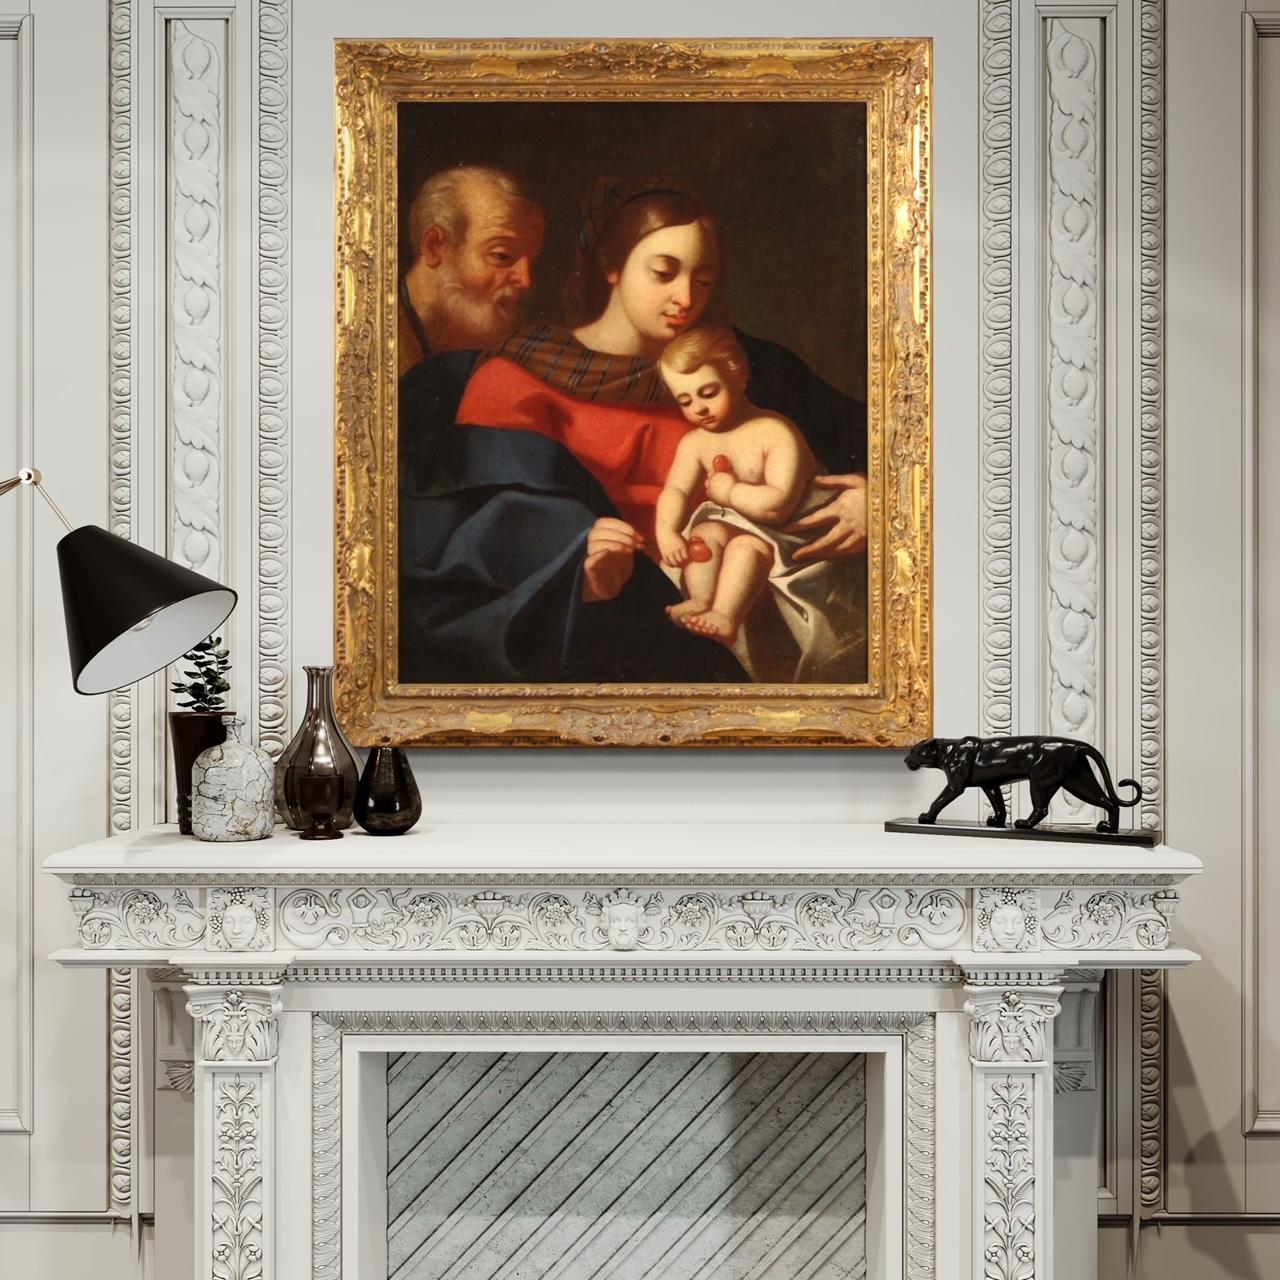 Antique Italian painting from the 18th century. Artwork oil on canvas depicting a religious subject, Holy Family of good pictorial quality. Painting adorned with a modern frame in wood and plaster, carved and gilded, of beautiful decoration.